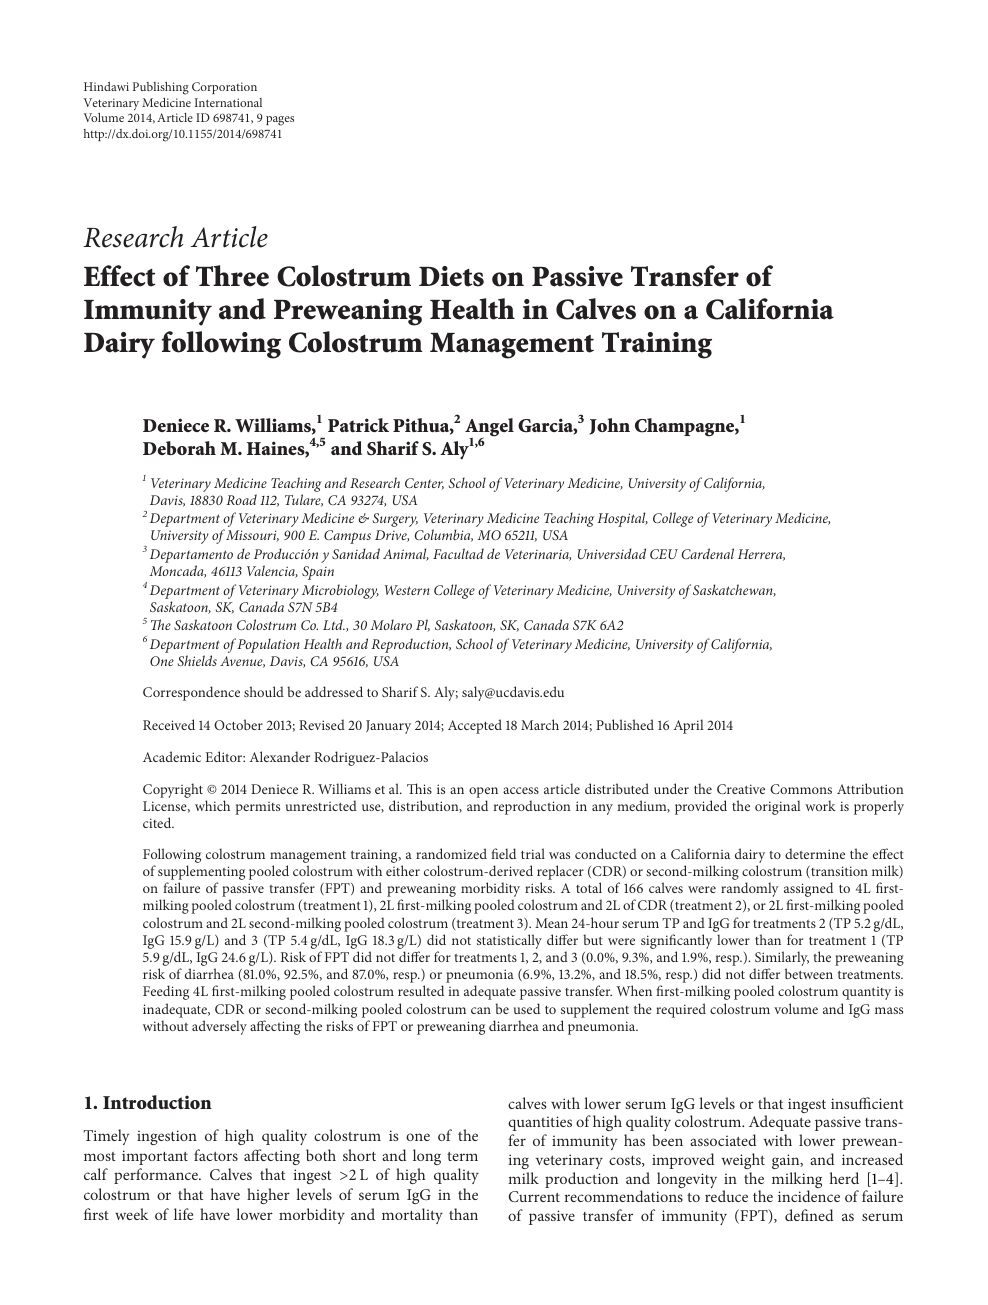 Effects of colostrum management on transfer of passive immunity